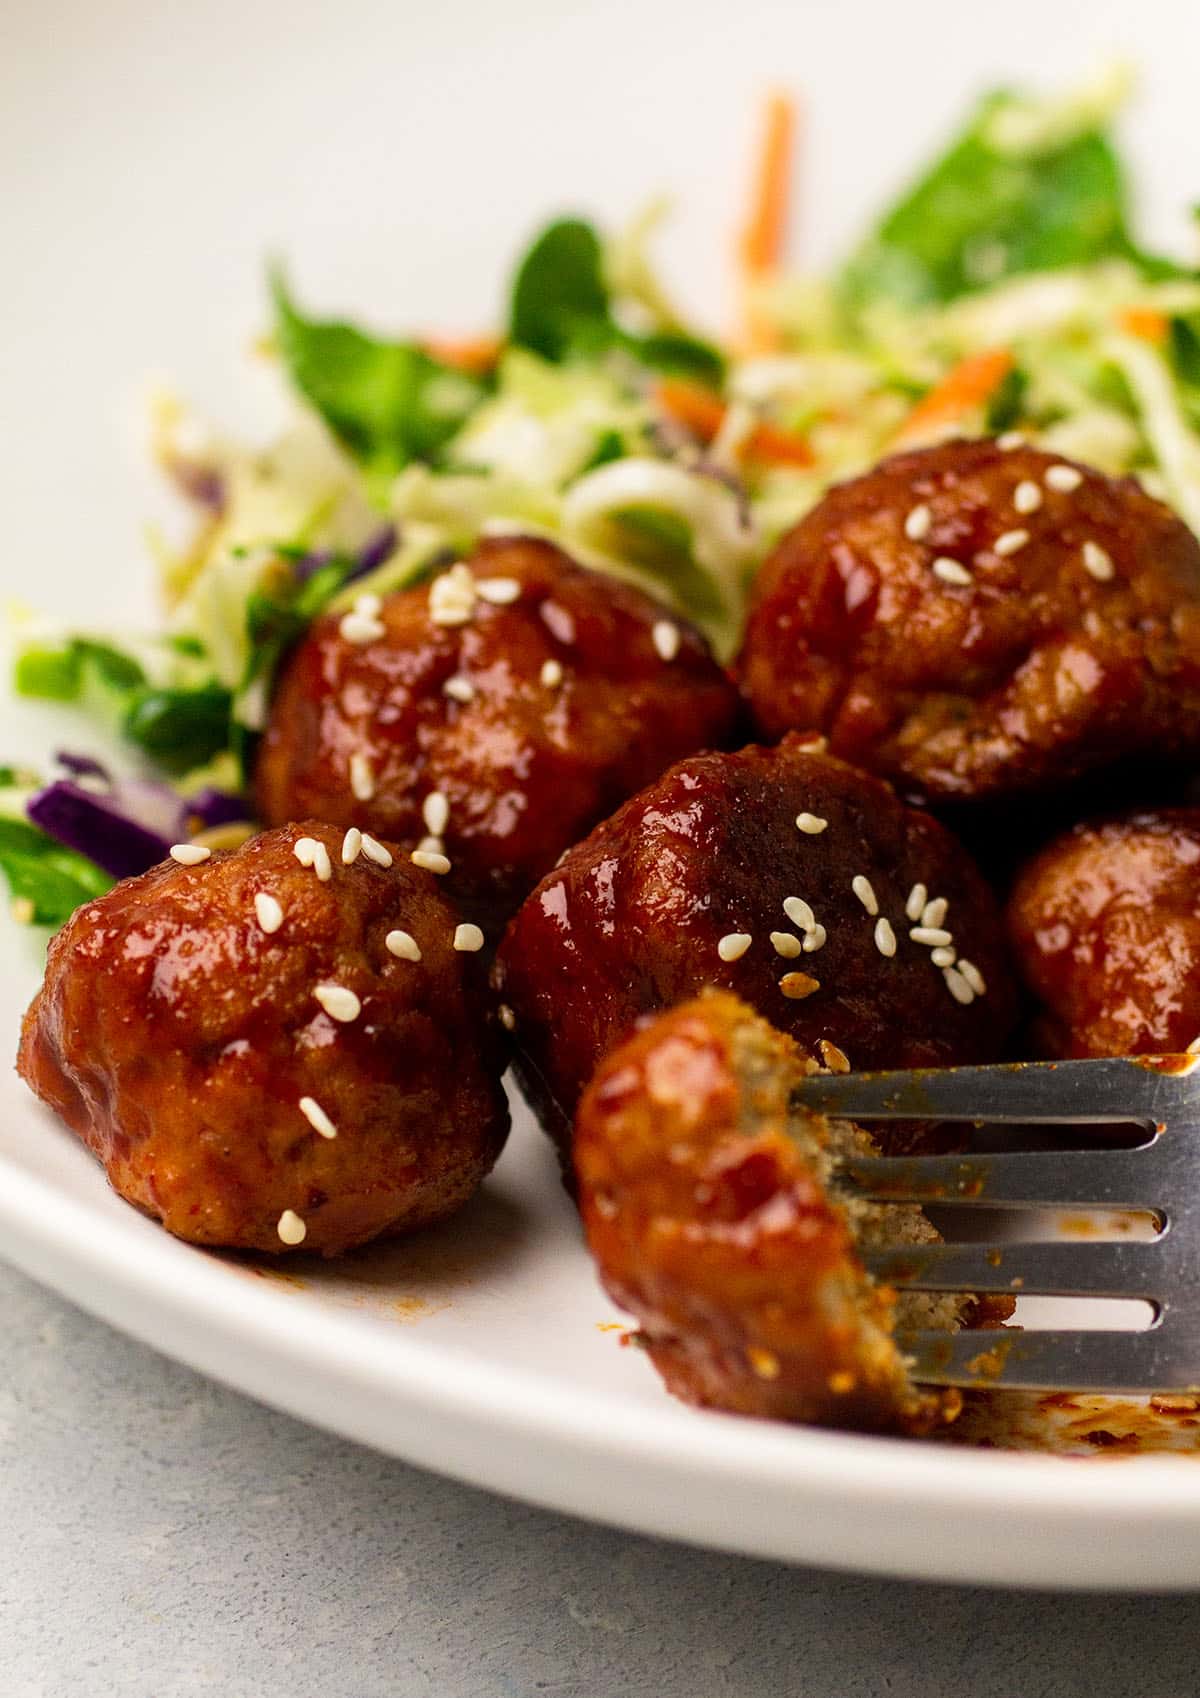 Meatballs with gochujang sauce on a plate with salad.